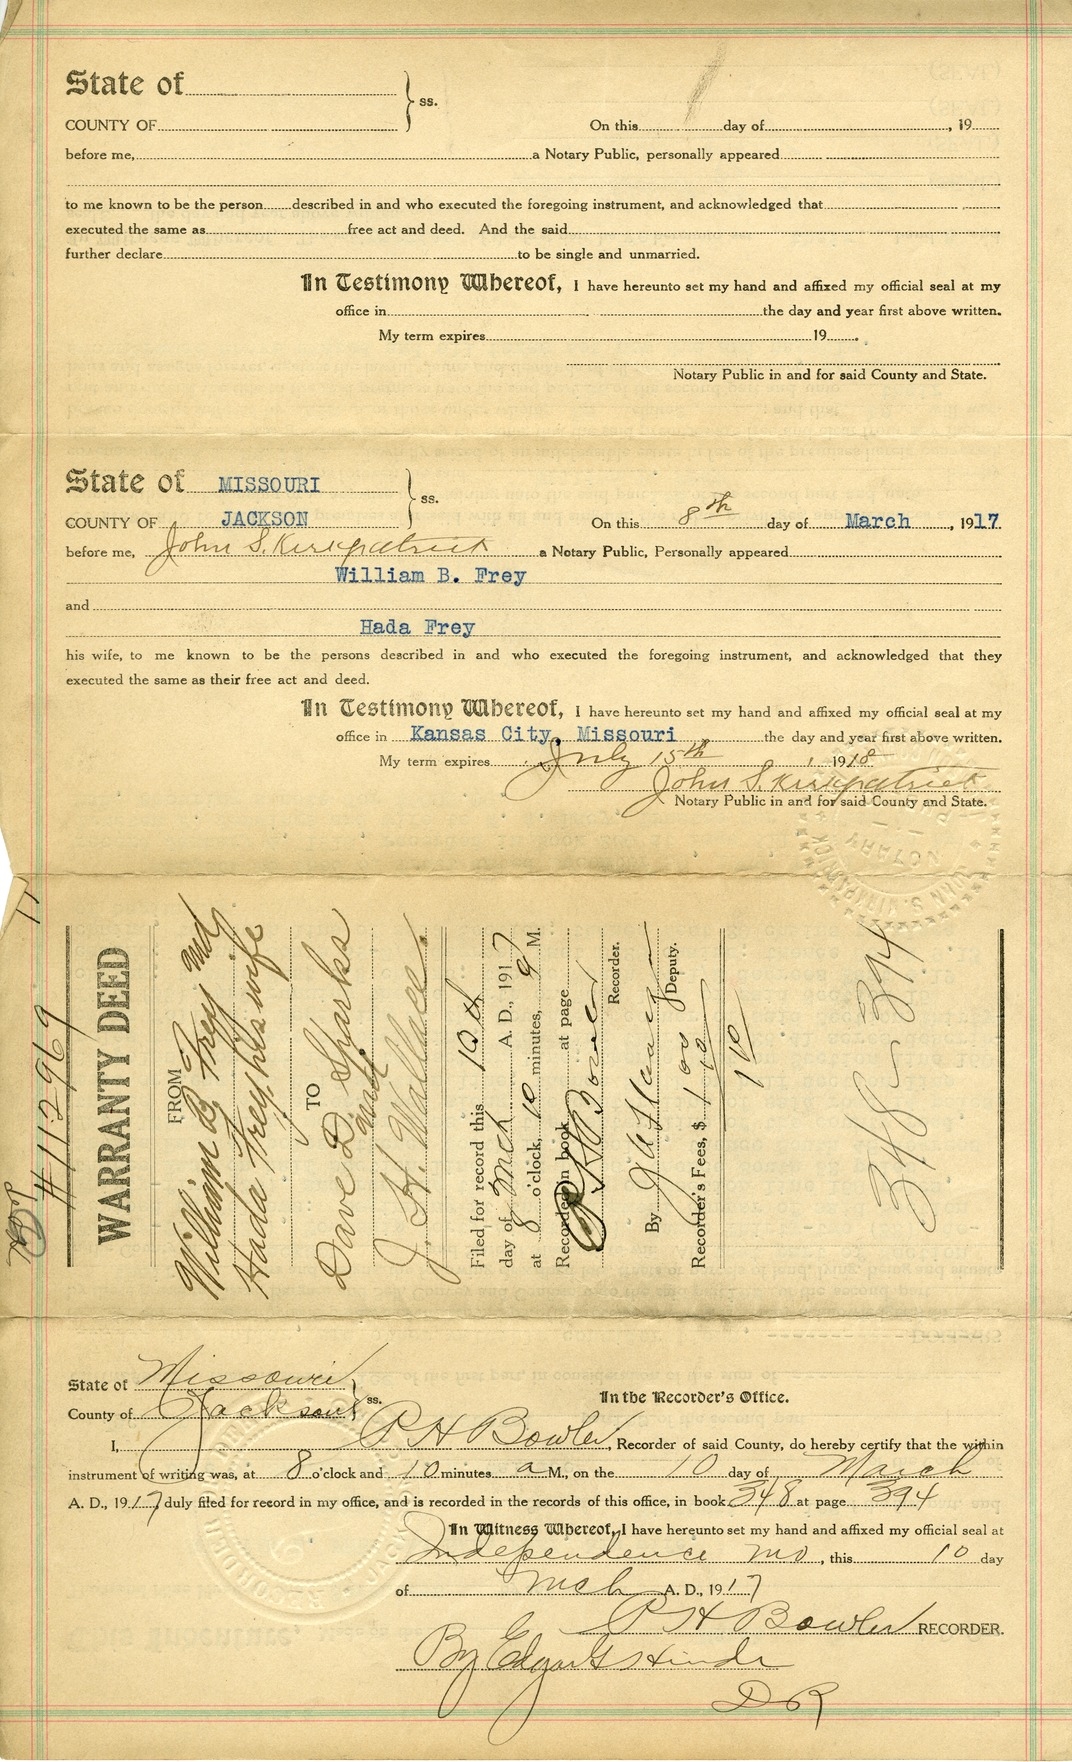 Warranty Deed from William B. Frey and Hada Frey to Dave D. Sharks and J. H. Wallace